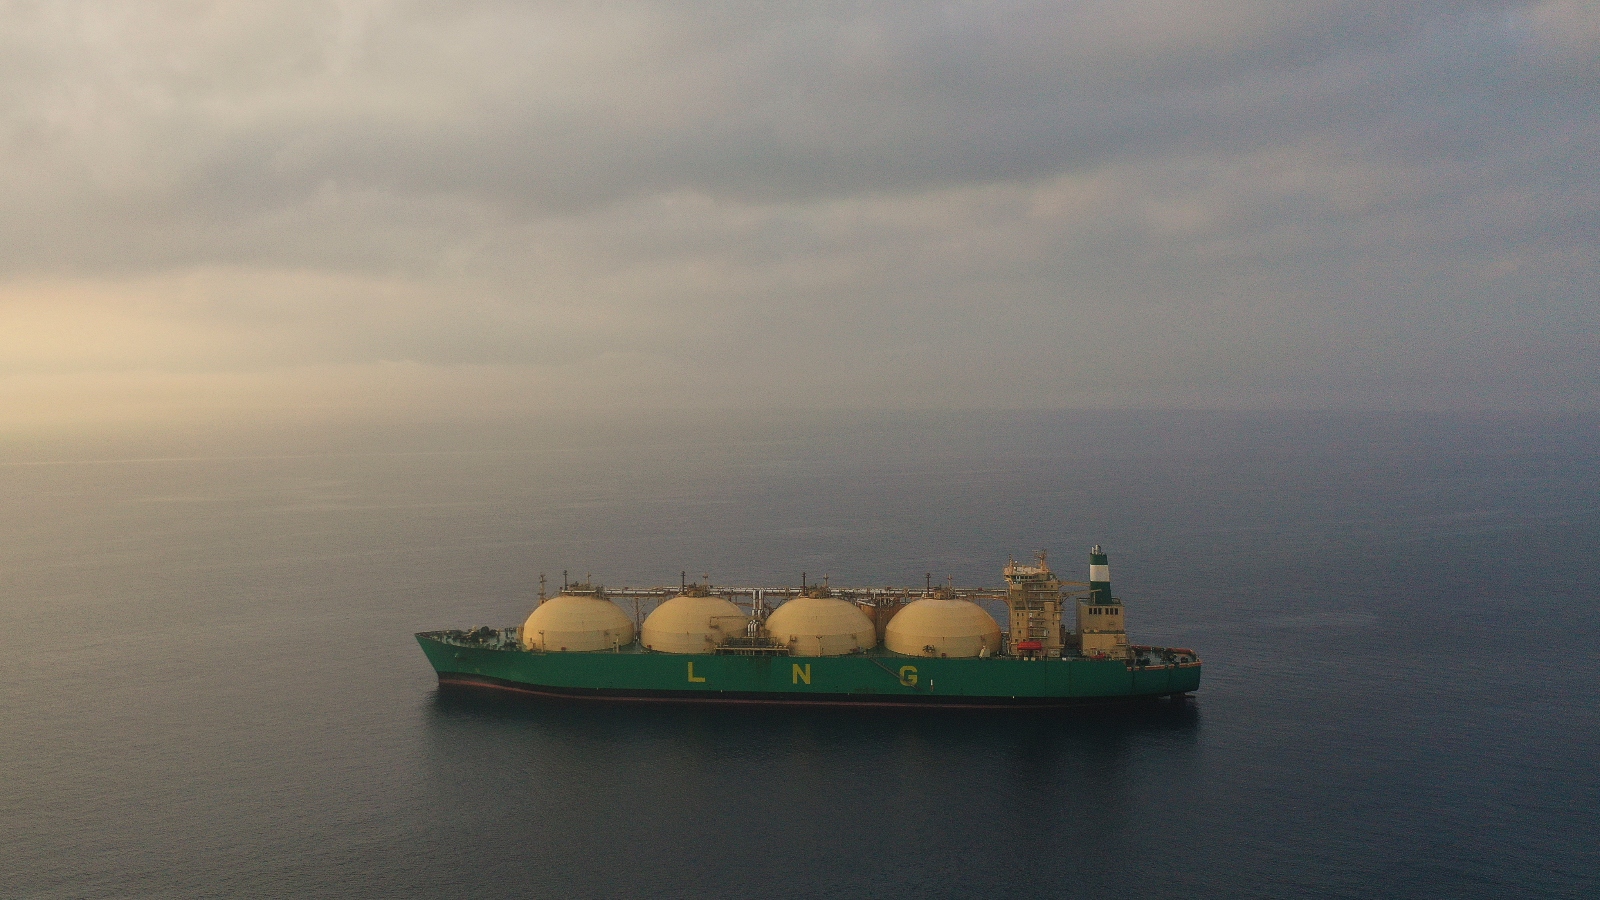 An LNG Tanker sailing under the flag of Palau is moored off the coast of Cyprus. The United States has become one of the world's largest LNG exporters over the past decade.